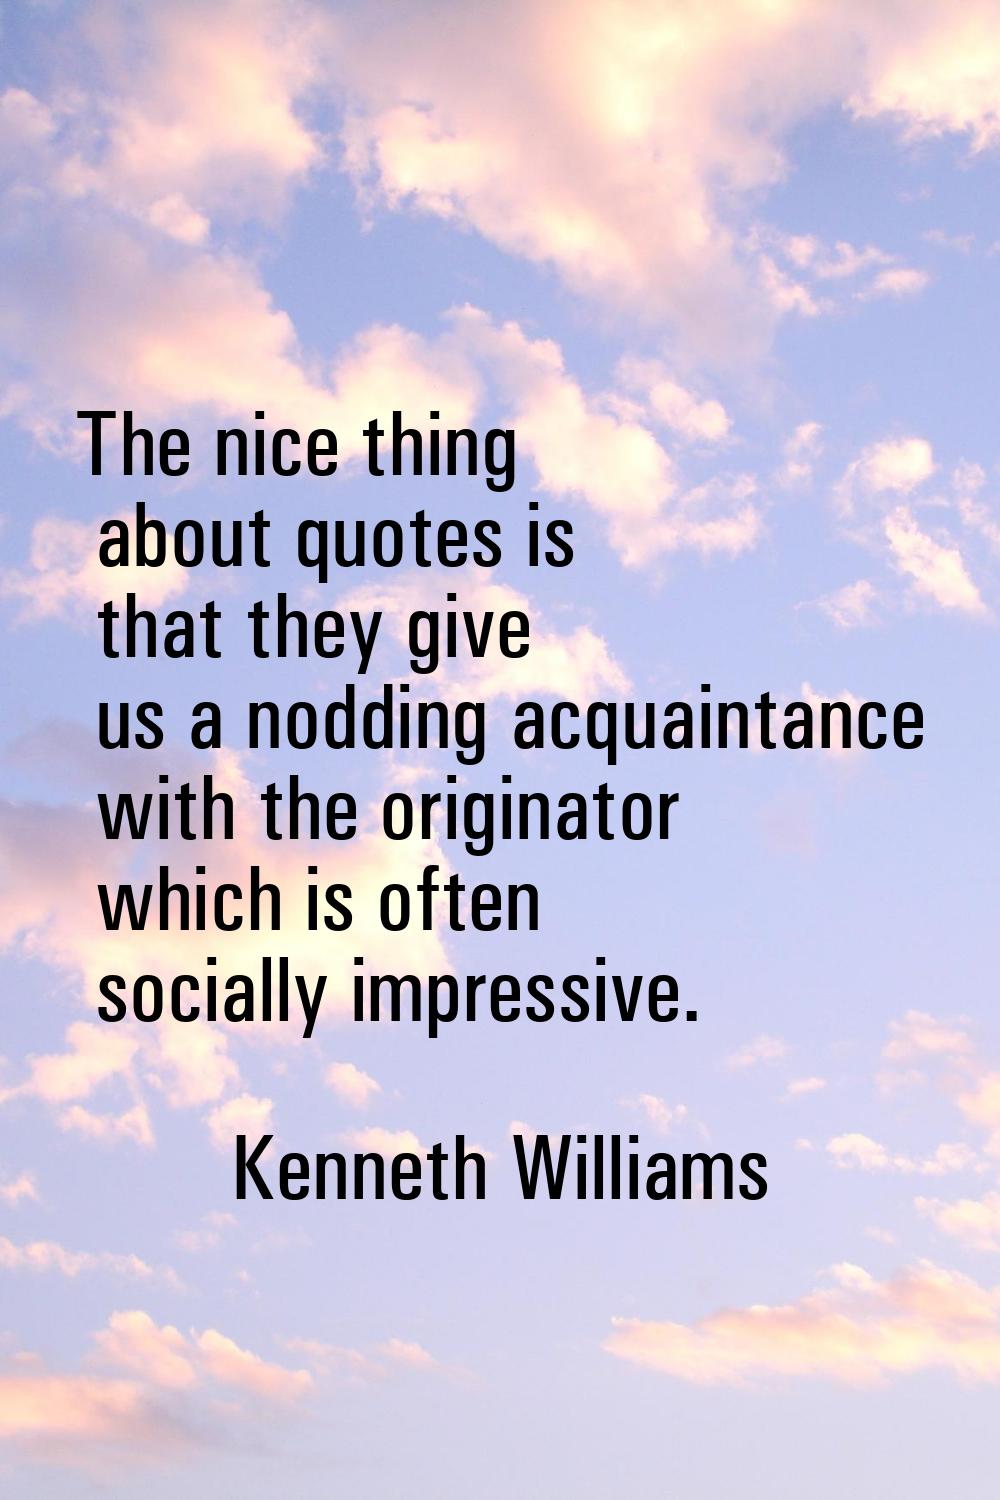 The nice thing about quotes is that they give us a nodding acquaintance with the originator which i